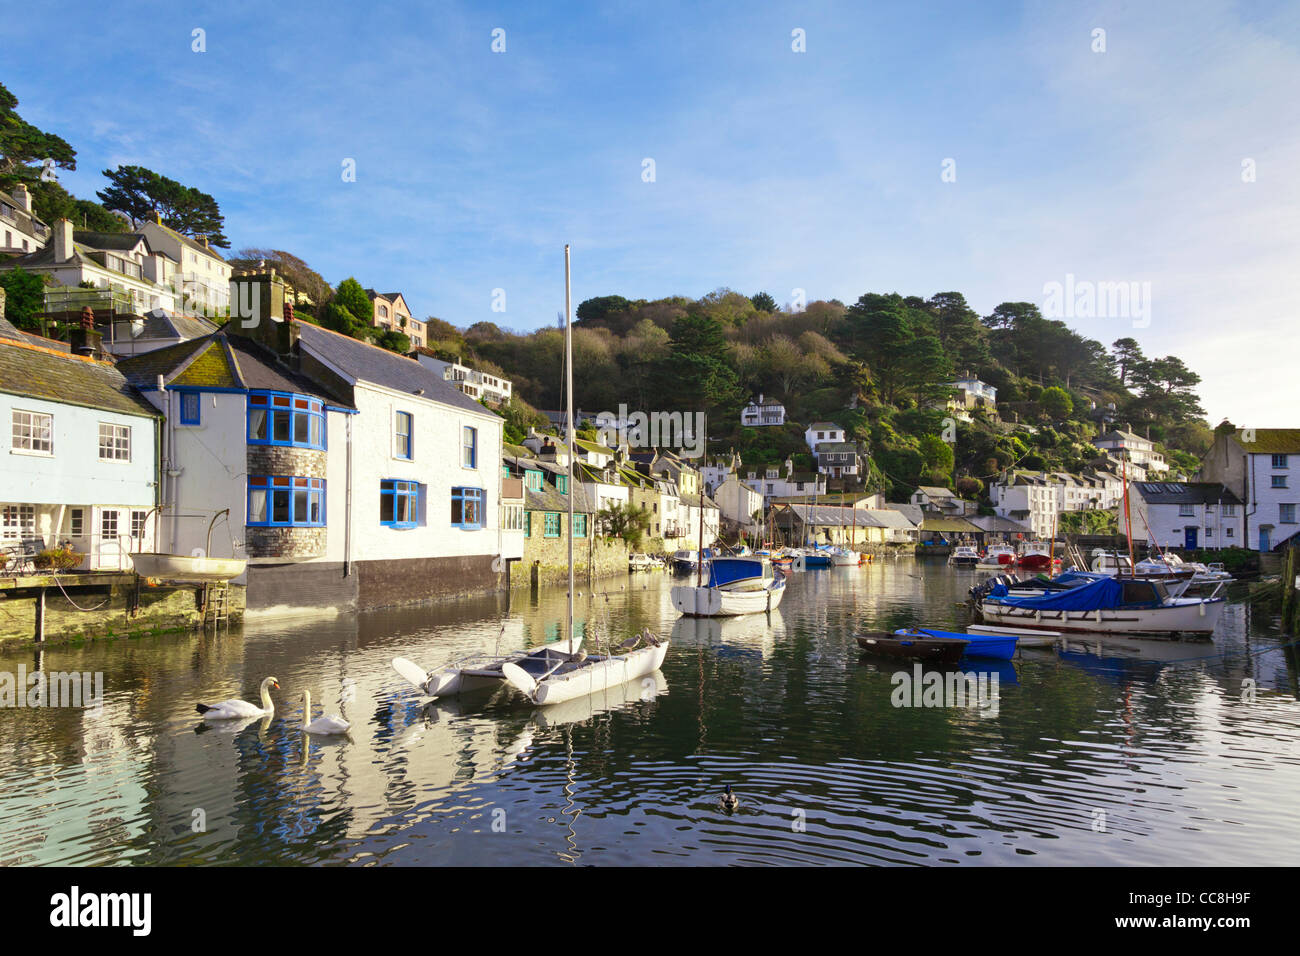 The Cornish fishing village of Polperro, one of the area's major tourist attractions. Photographed on a sunny October day. Stock Photo